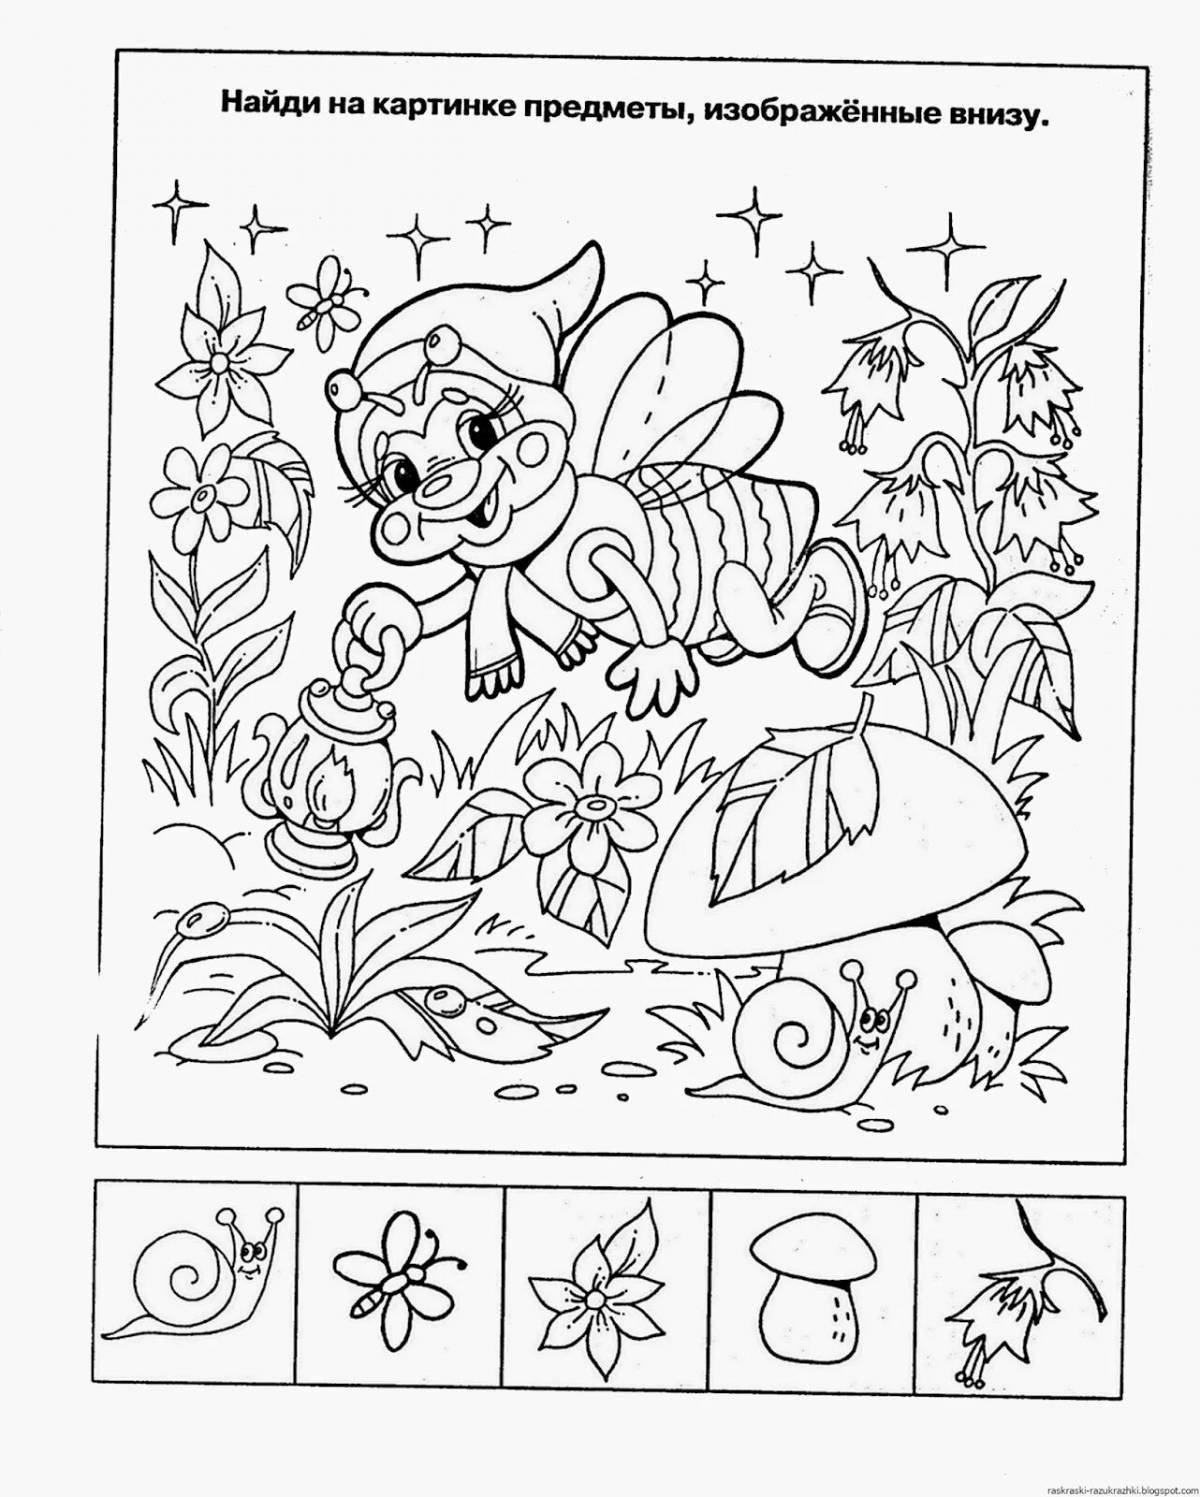 A fascinating coloring book for children aged 5-6, developing